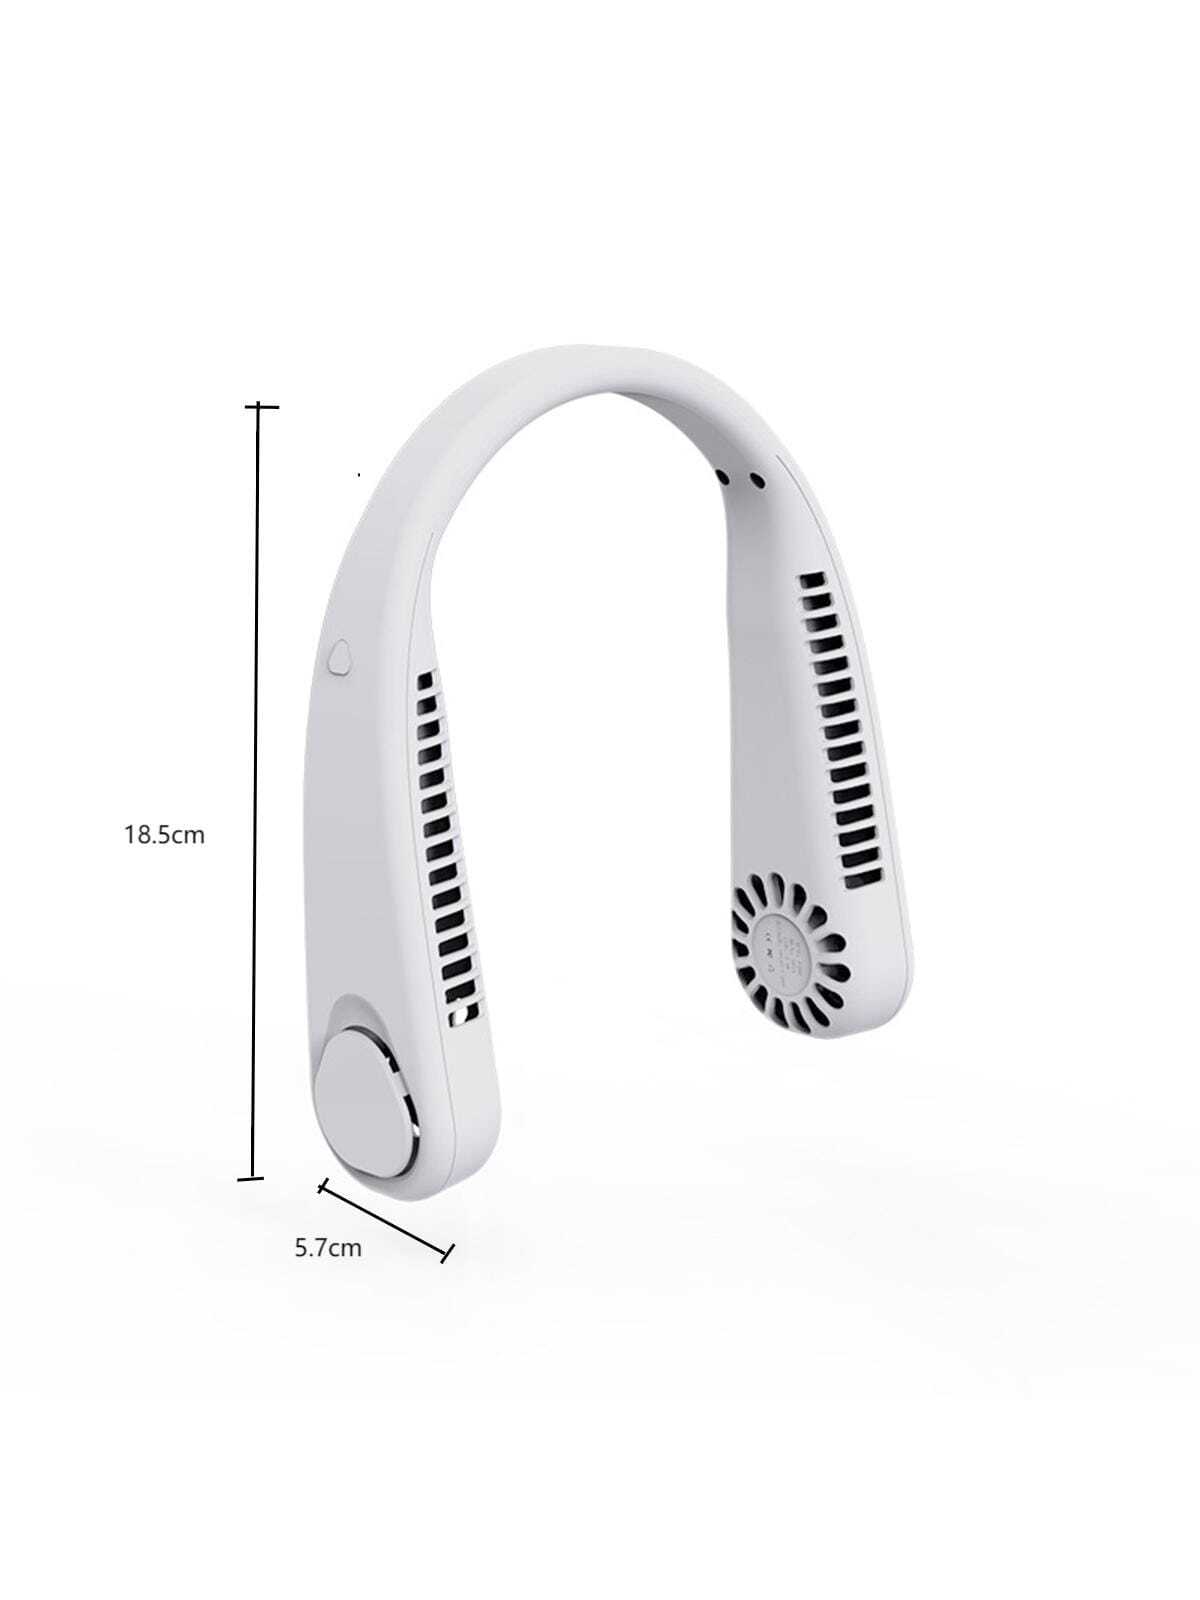 Rechargeable Neckband Fan Wearable Outdoors Without Blade-White-10